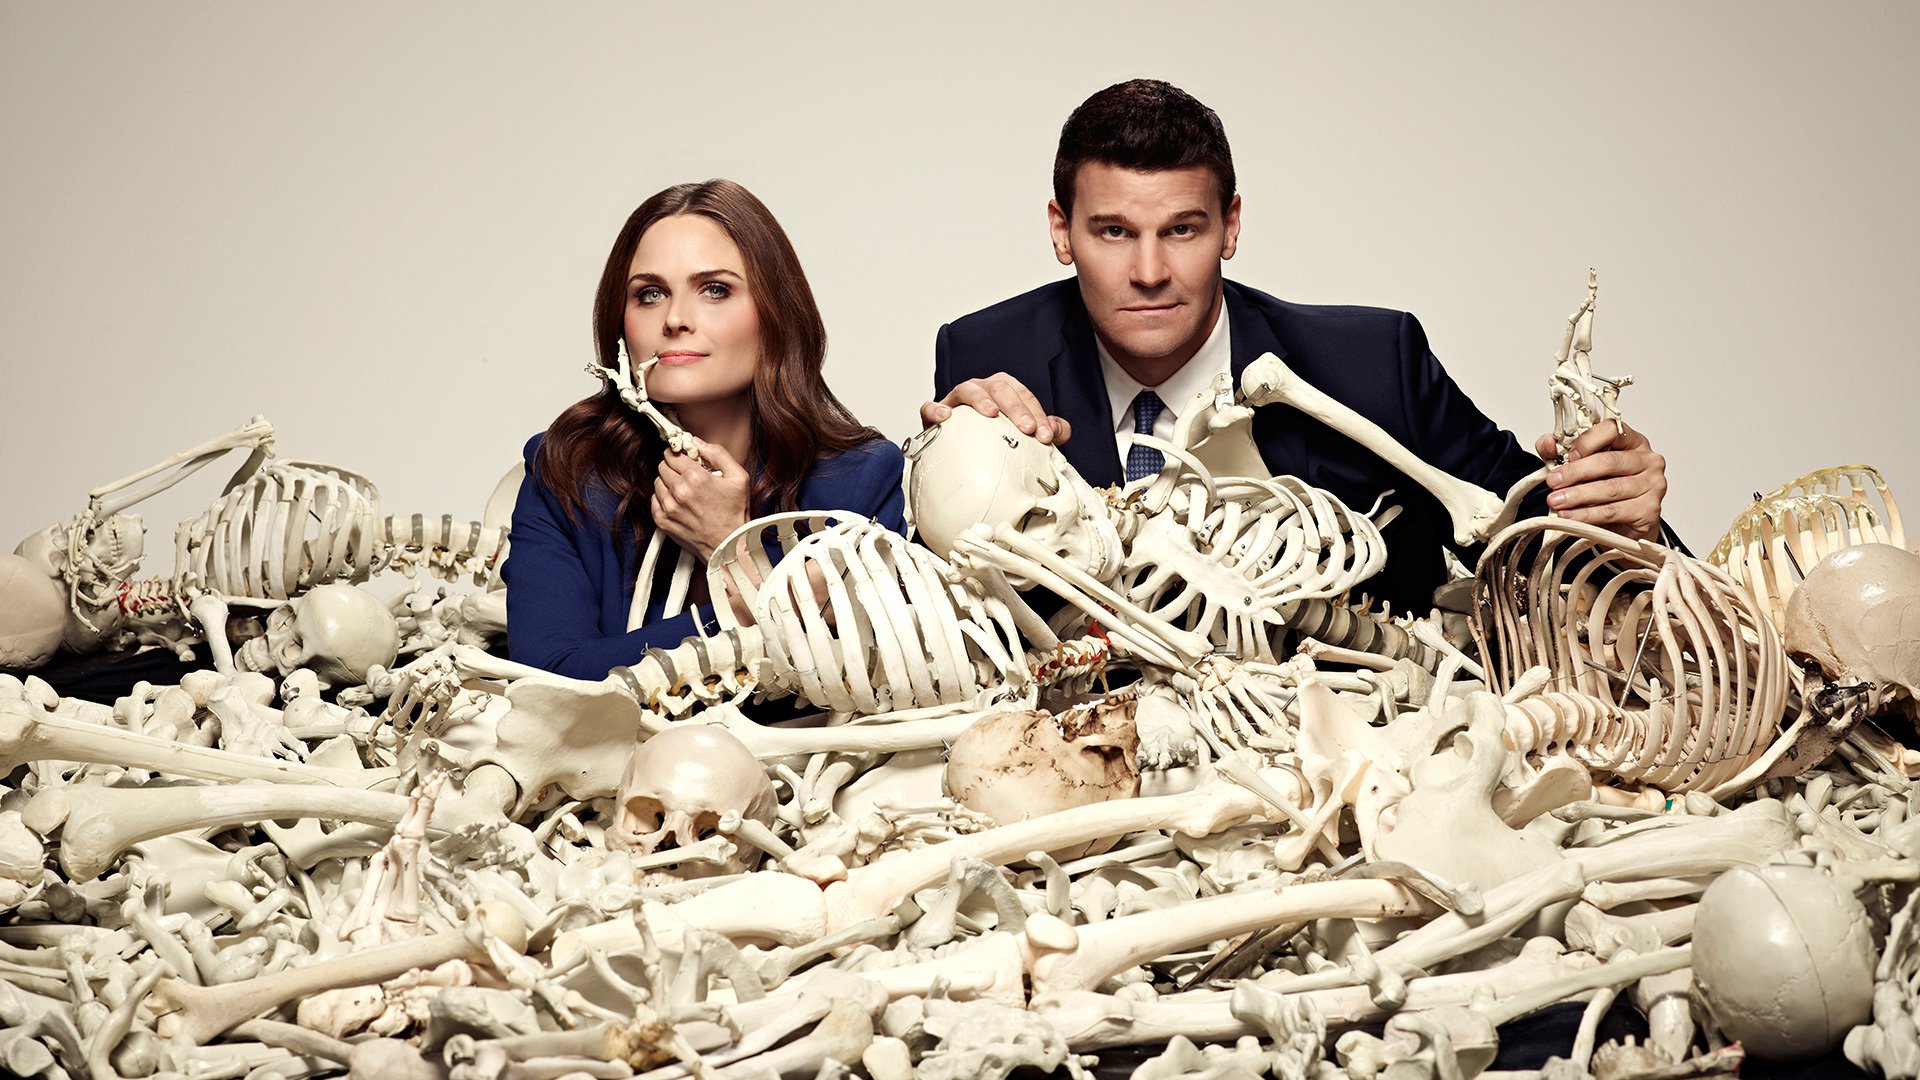 KumkumArts TV Show Bones Camille Saroyan Taylor Seeley Booth David Boreanaz  Poster 12 x 18 Inch, HD Quality Gloss Paper Qty 1. Paper Print - TV Series  posters in India - Buy art, film, design, movie, music, nature and  educational paintings/wallpapers